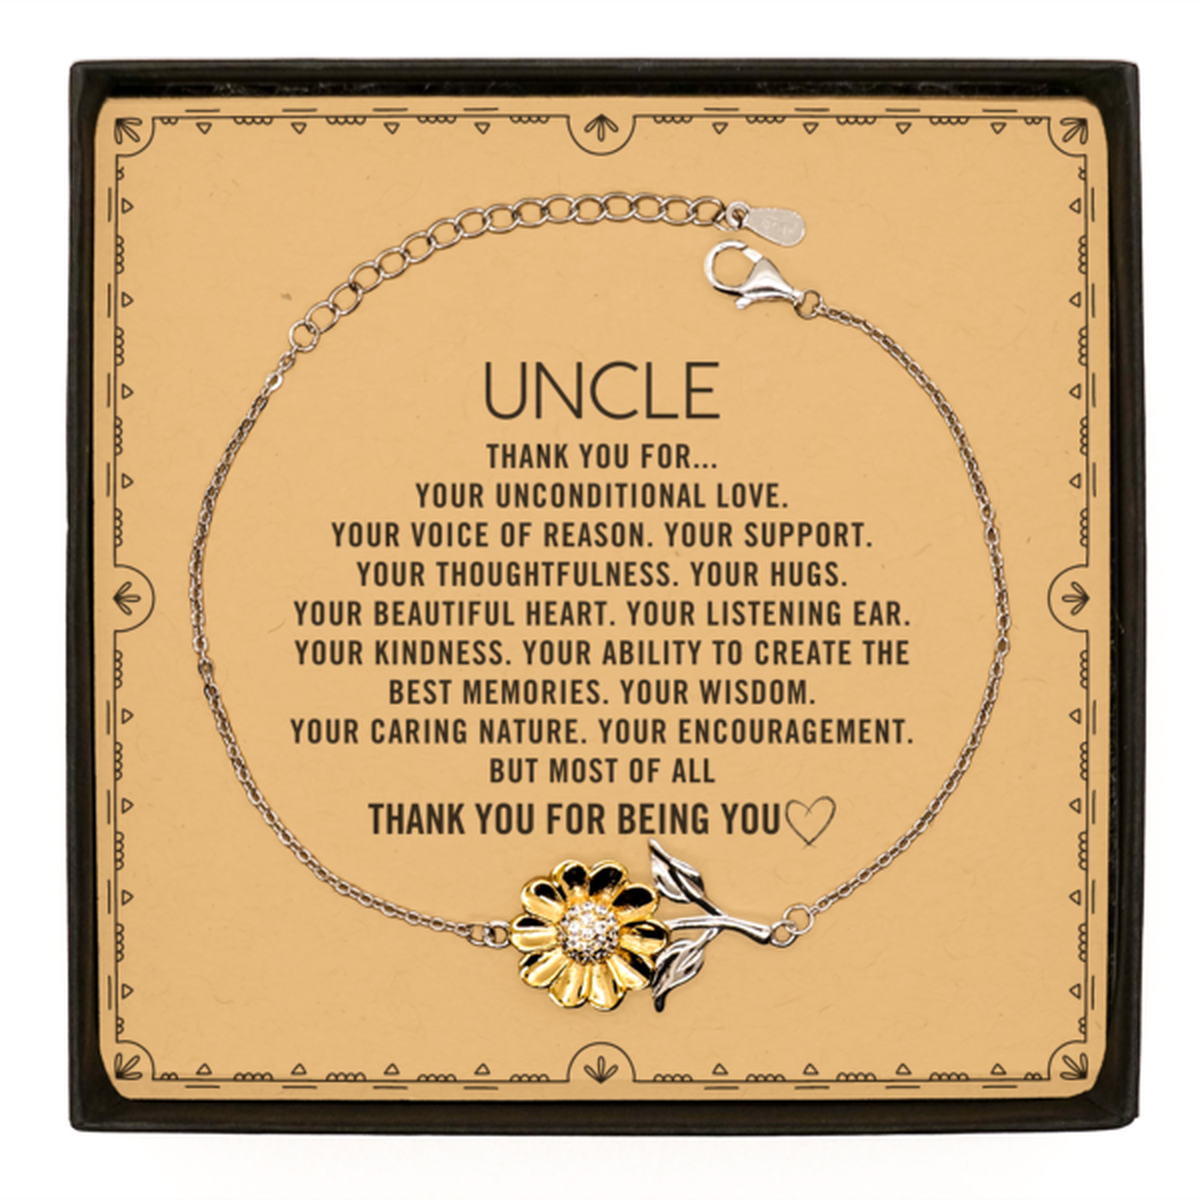 Uncle Sunflower Bracelet Custom, Message Card Gifts For Uncle Christmas Graduation Birthday Gifts for Men Women Uncle Thank you for Your unconditional love